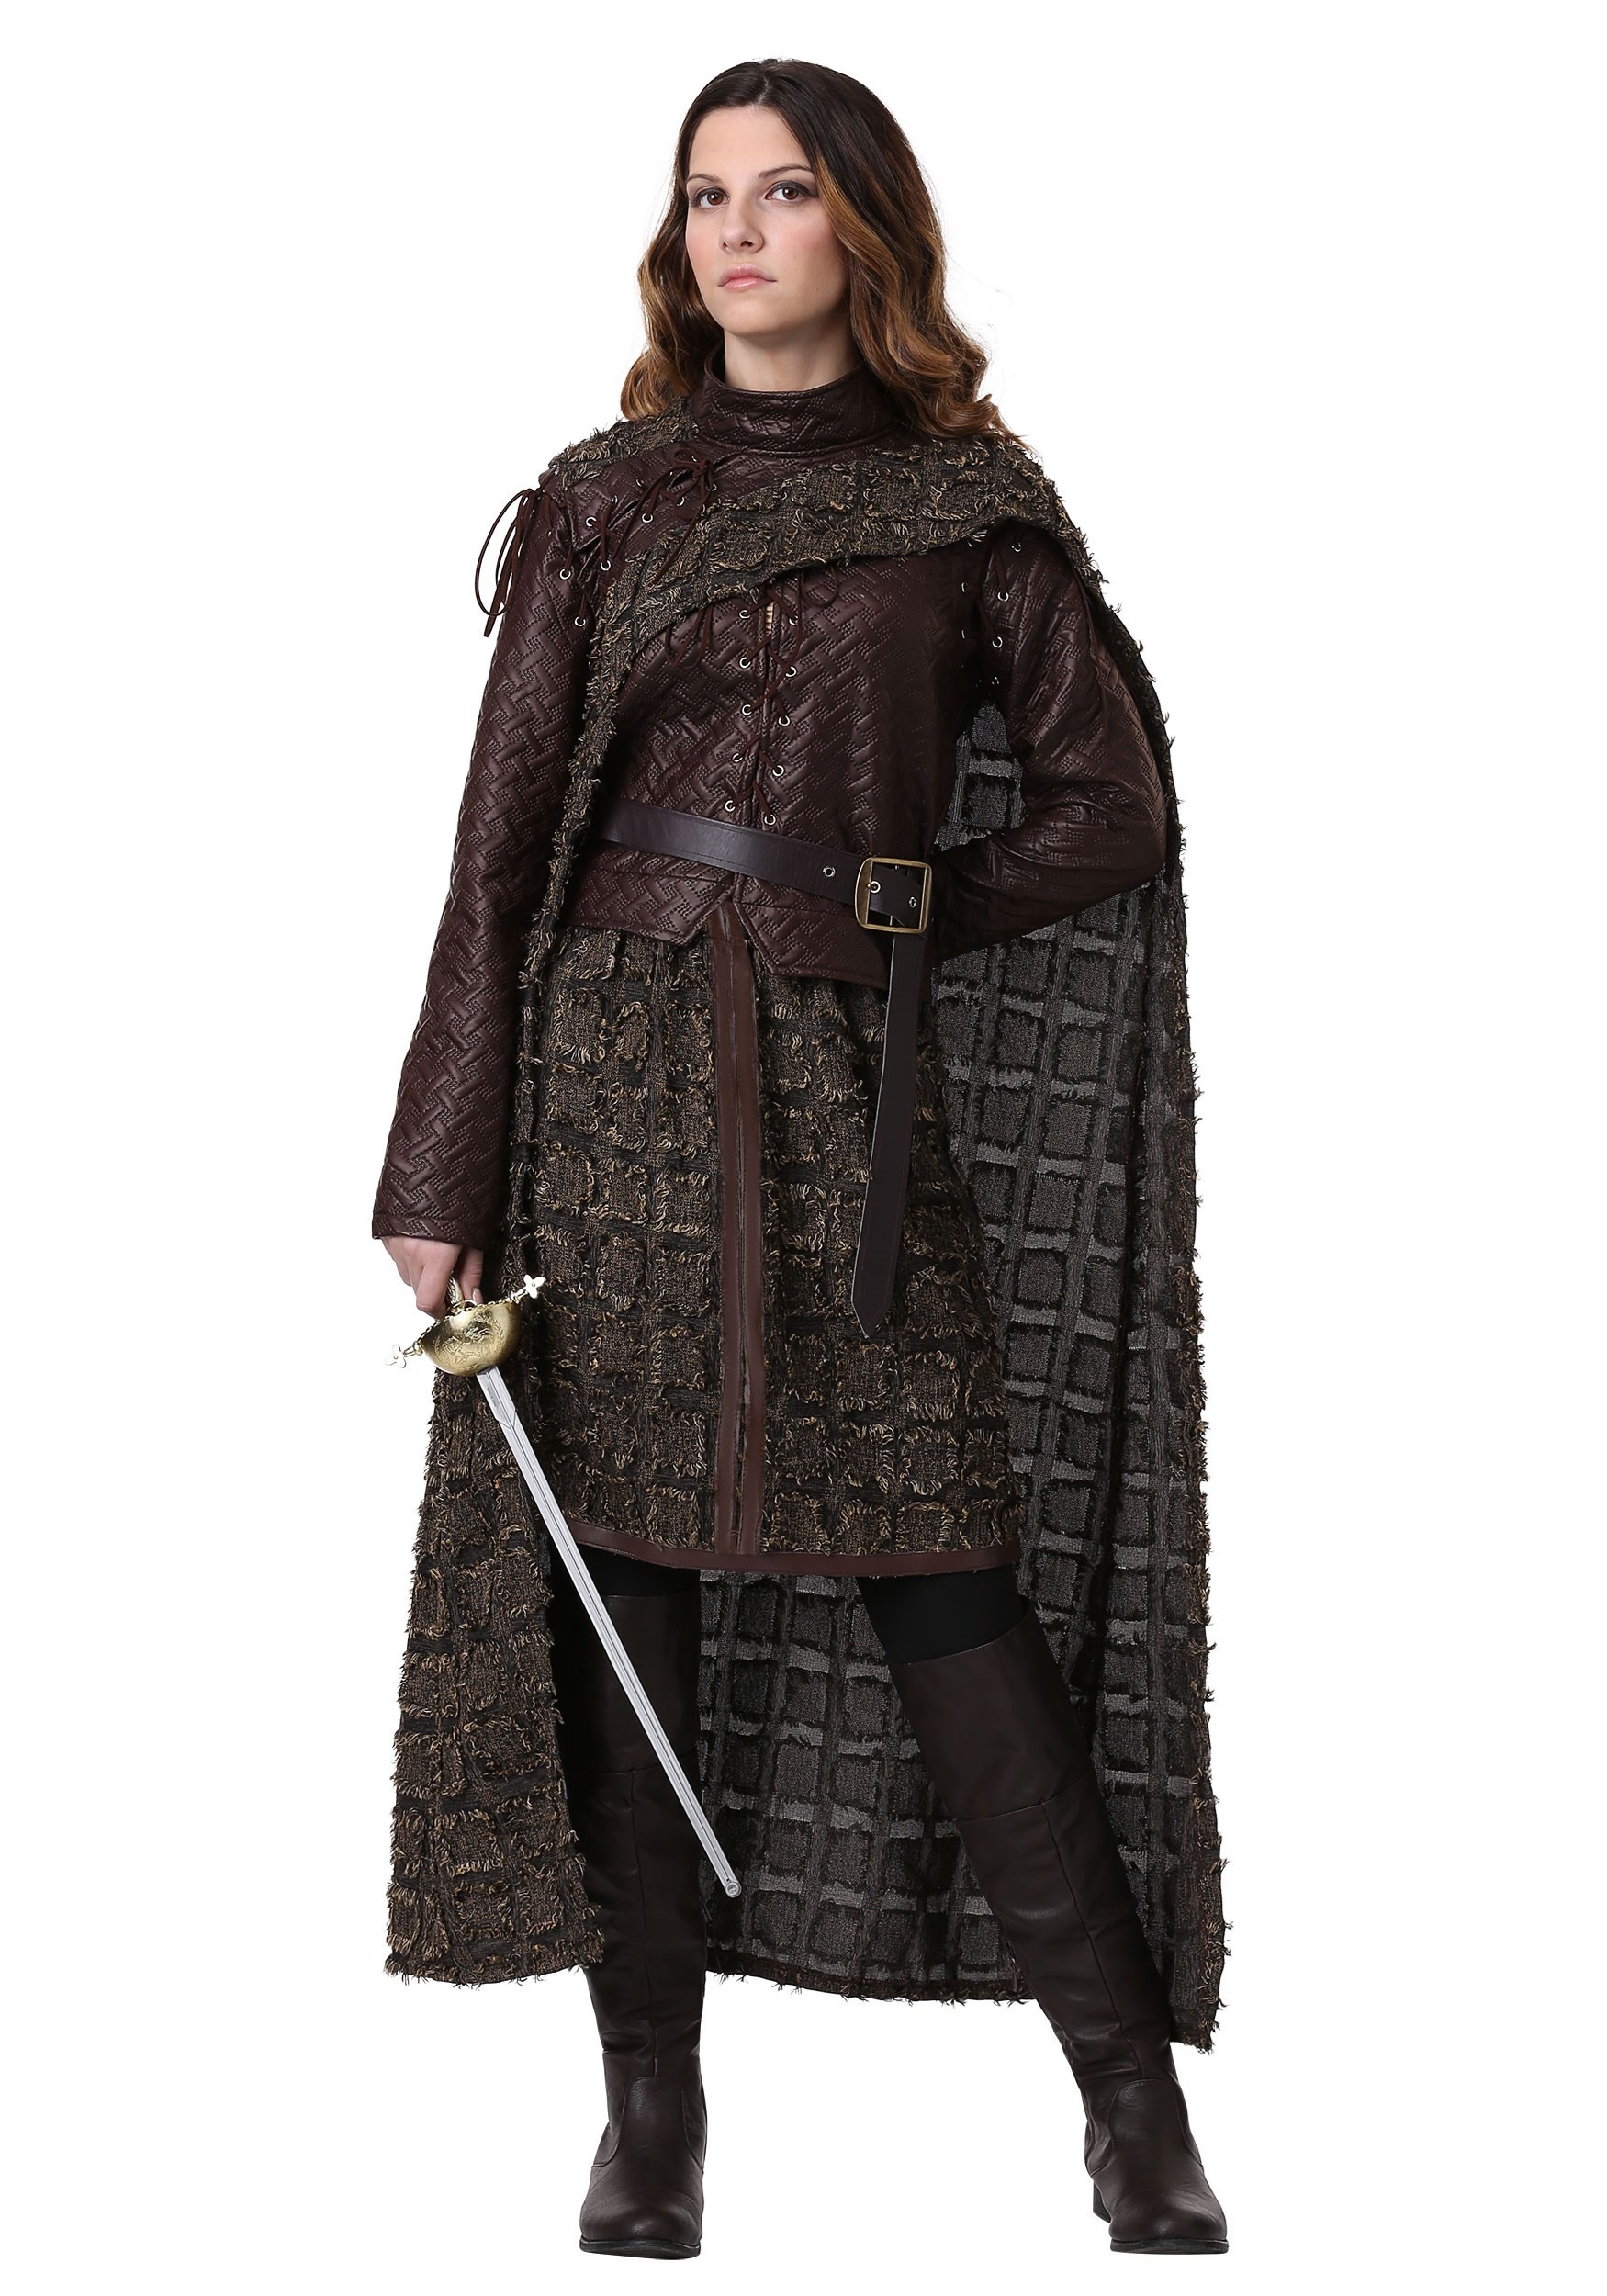 Plus Size Winter Warrior Costume for Womens